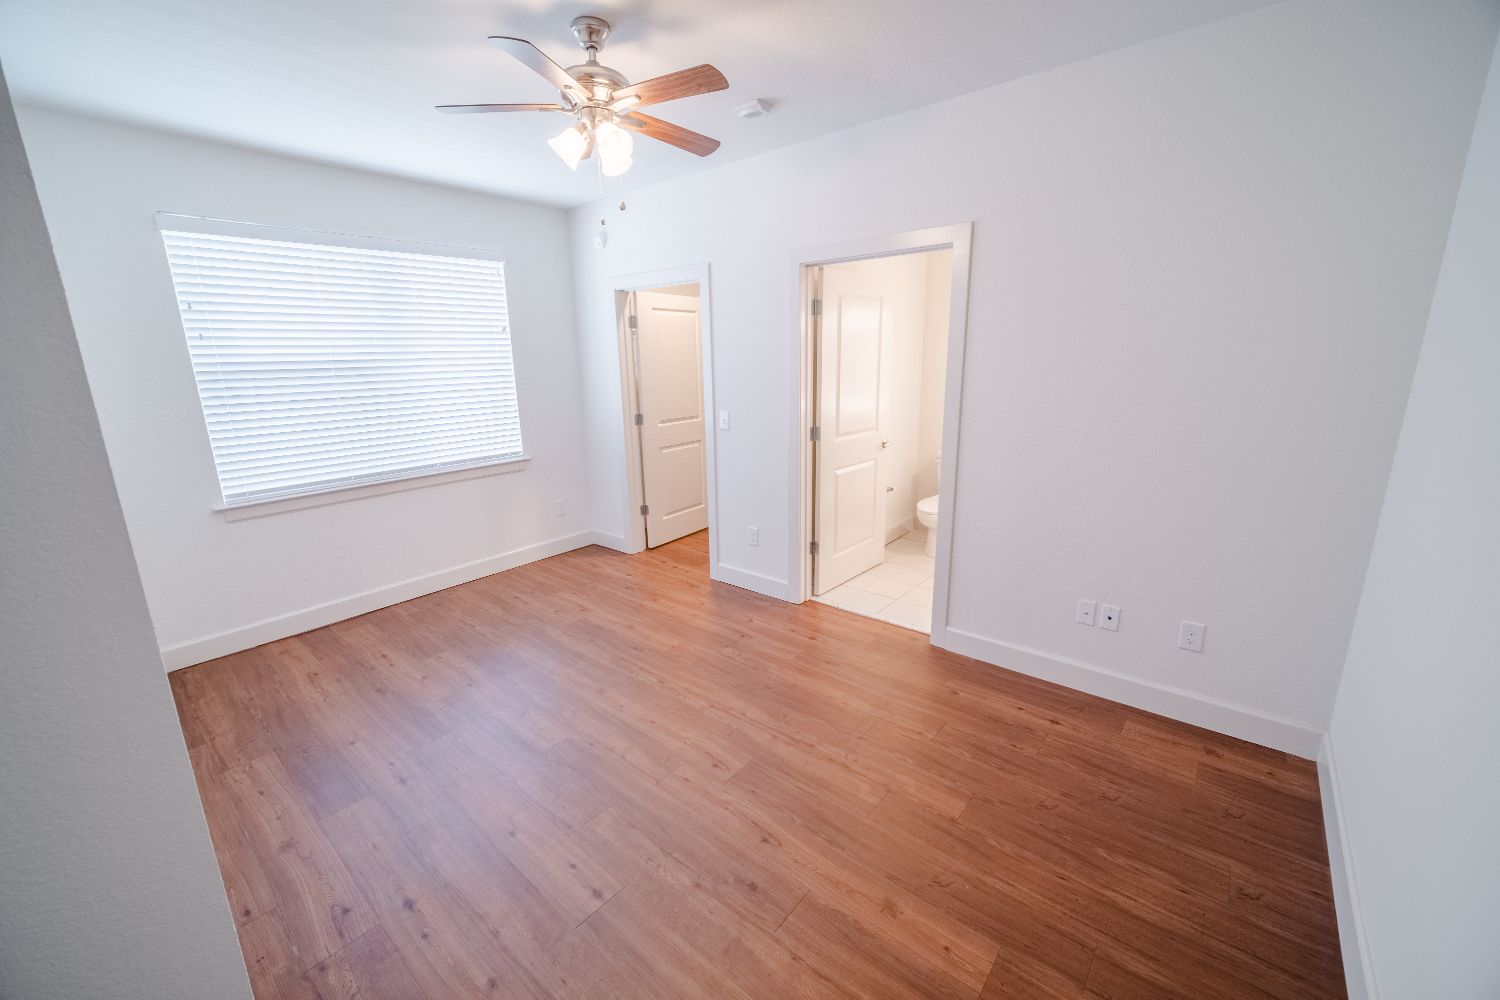 Wood-look flooring throughout the apartment